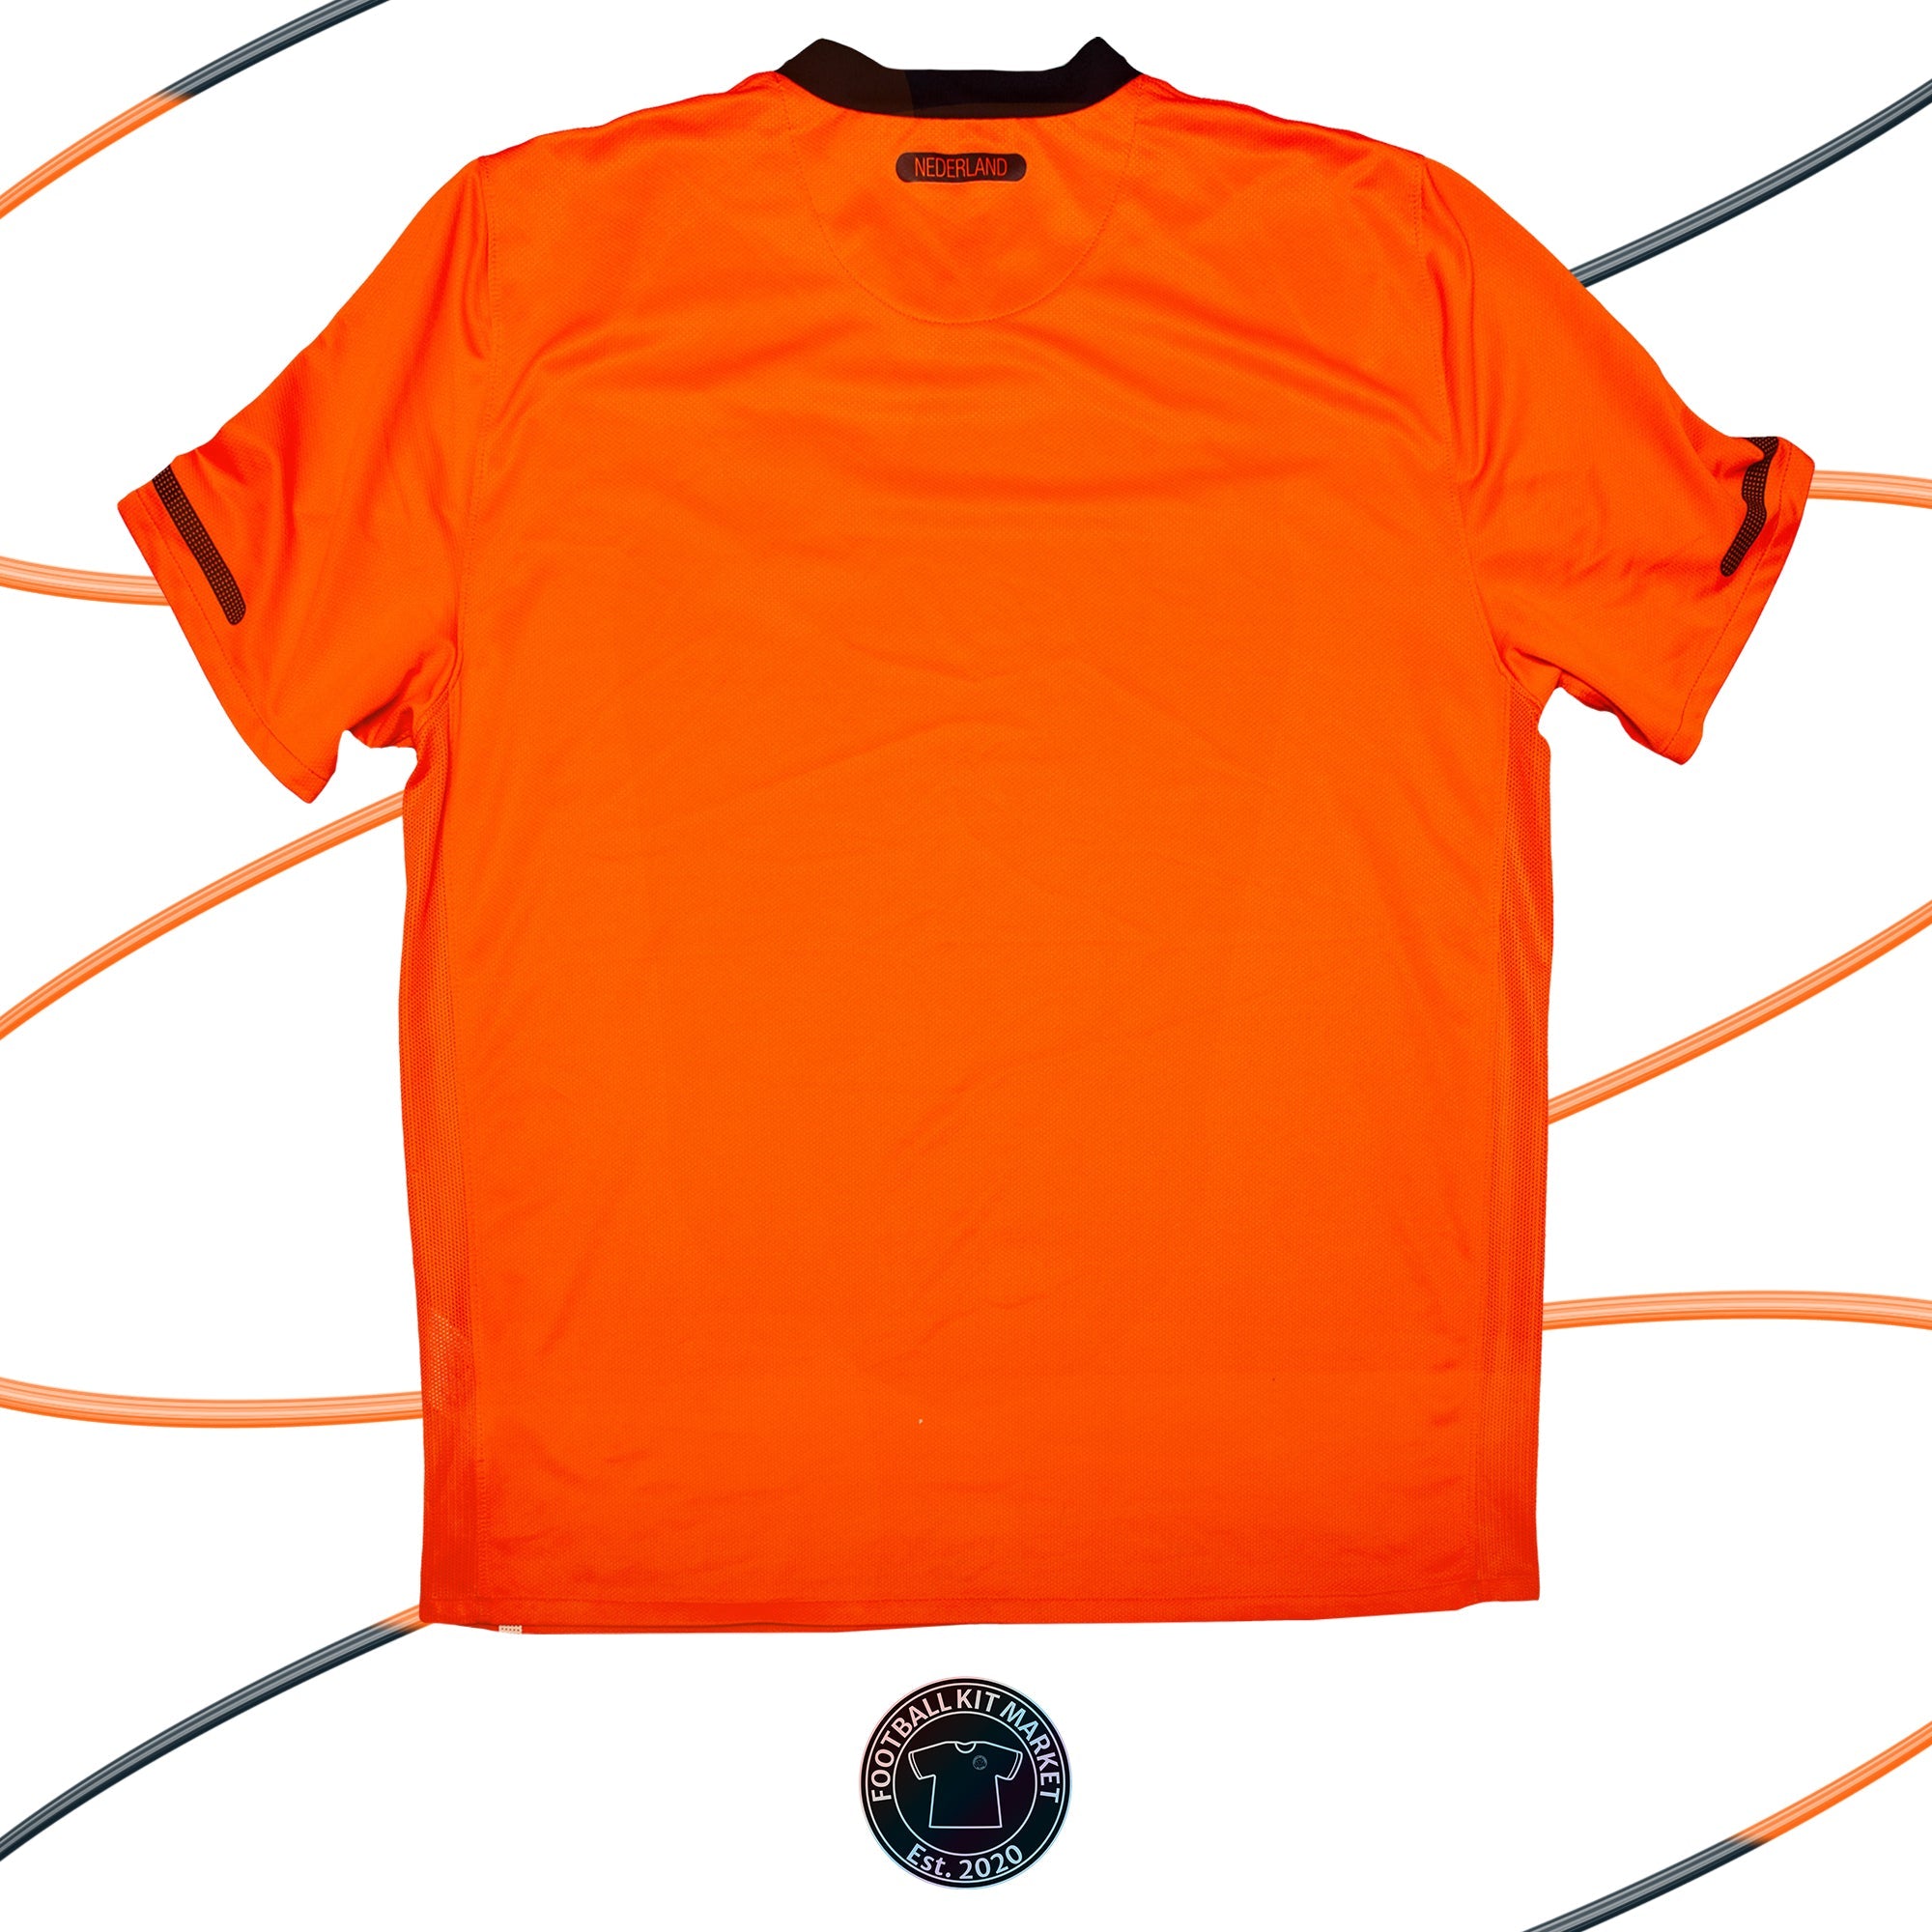 Genuine NETHERLANDS Home (2010-2011) - NIKE (XXL) - Product Image from Football Kit Market